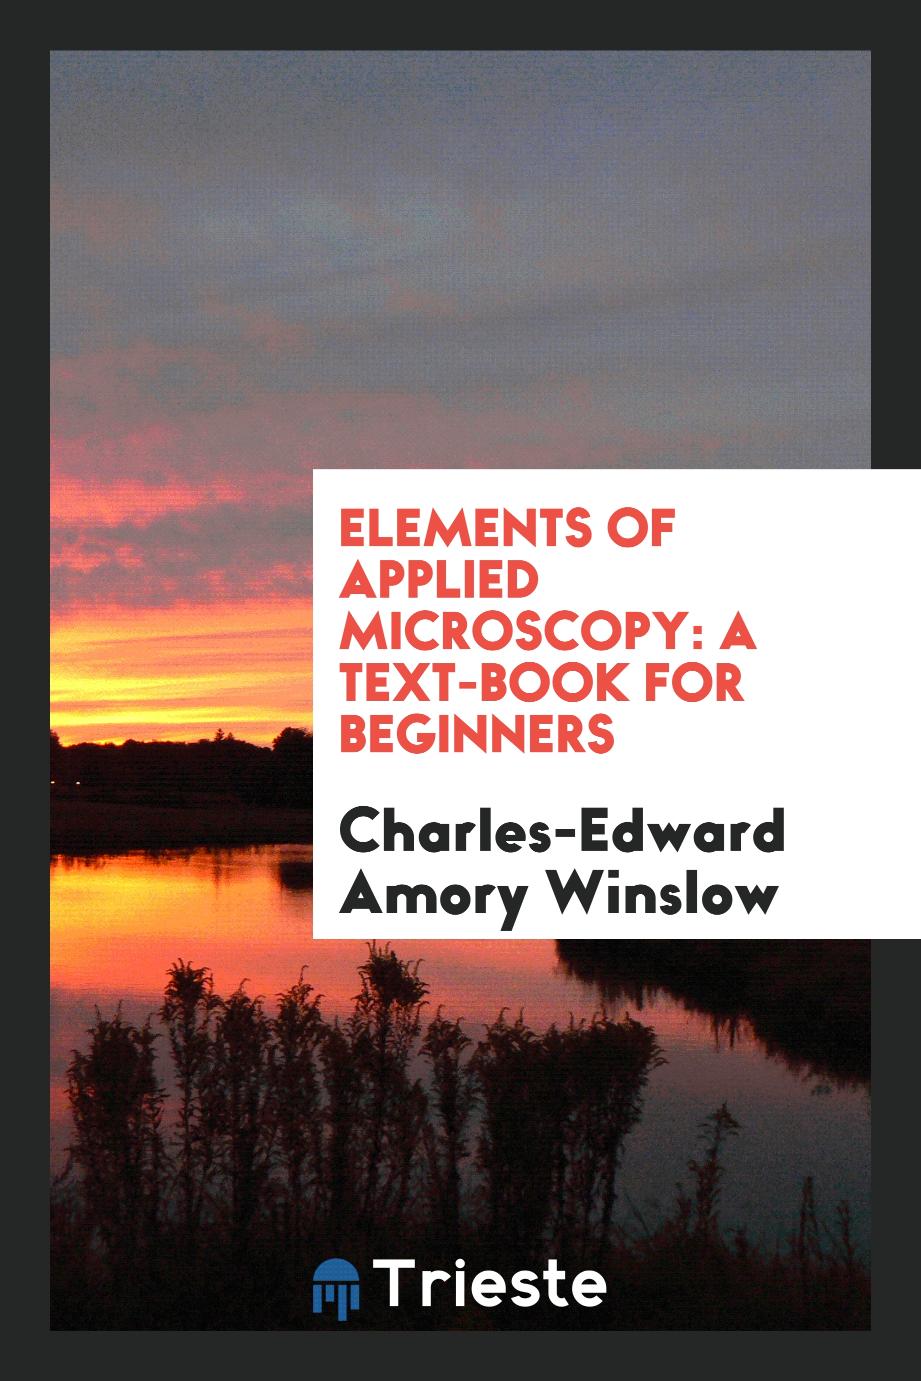 Charles-Edward Amory Winslow - Elements of Applied Microscopy: A Text-Book for Beginners